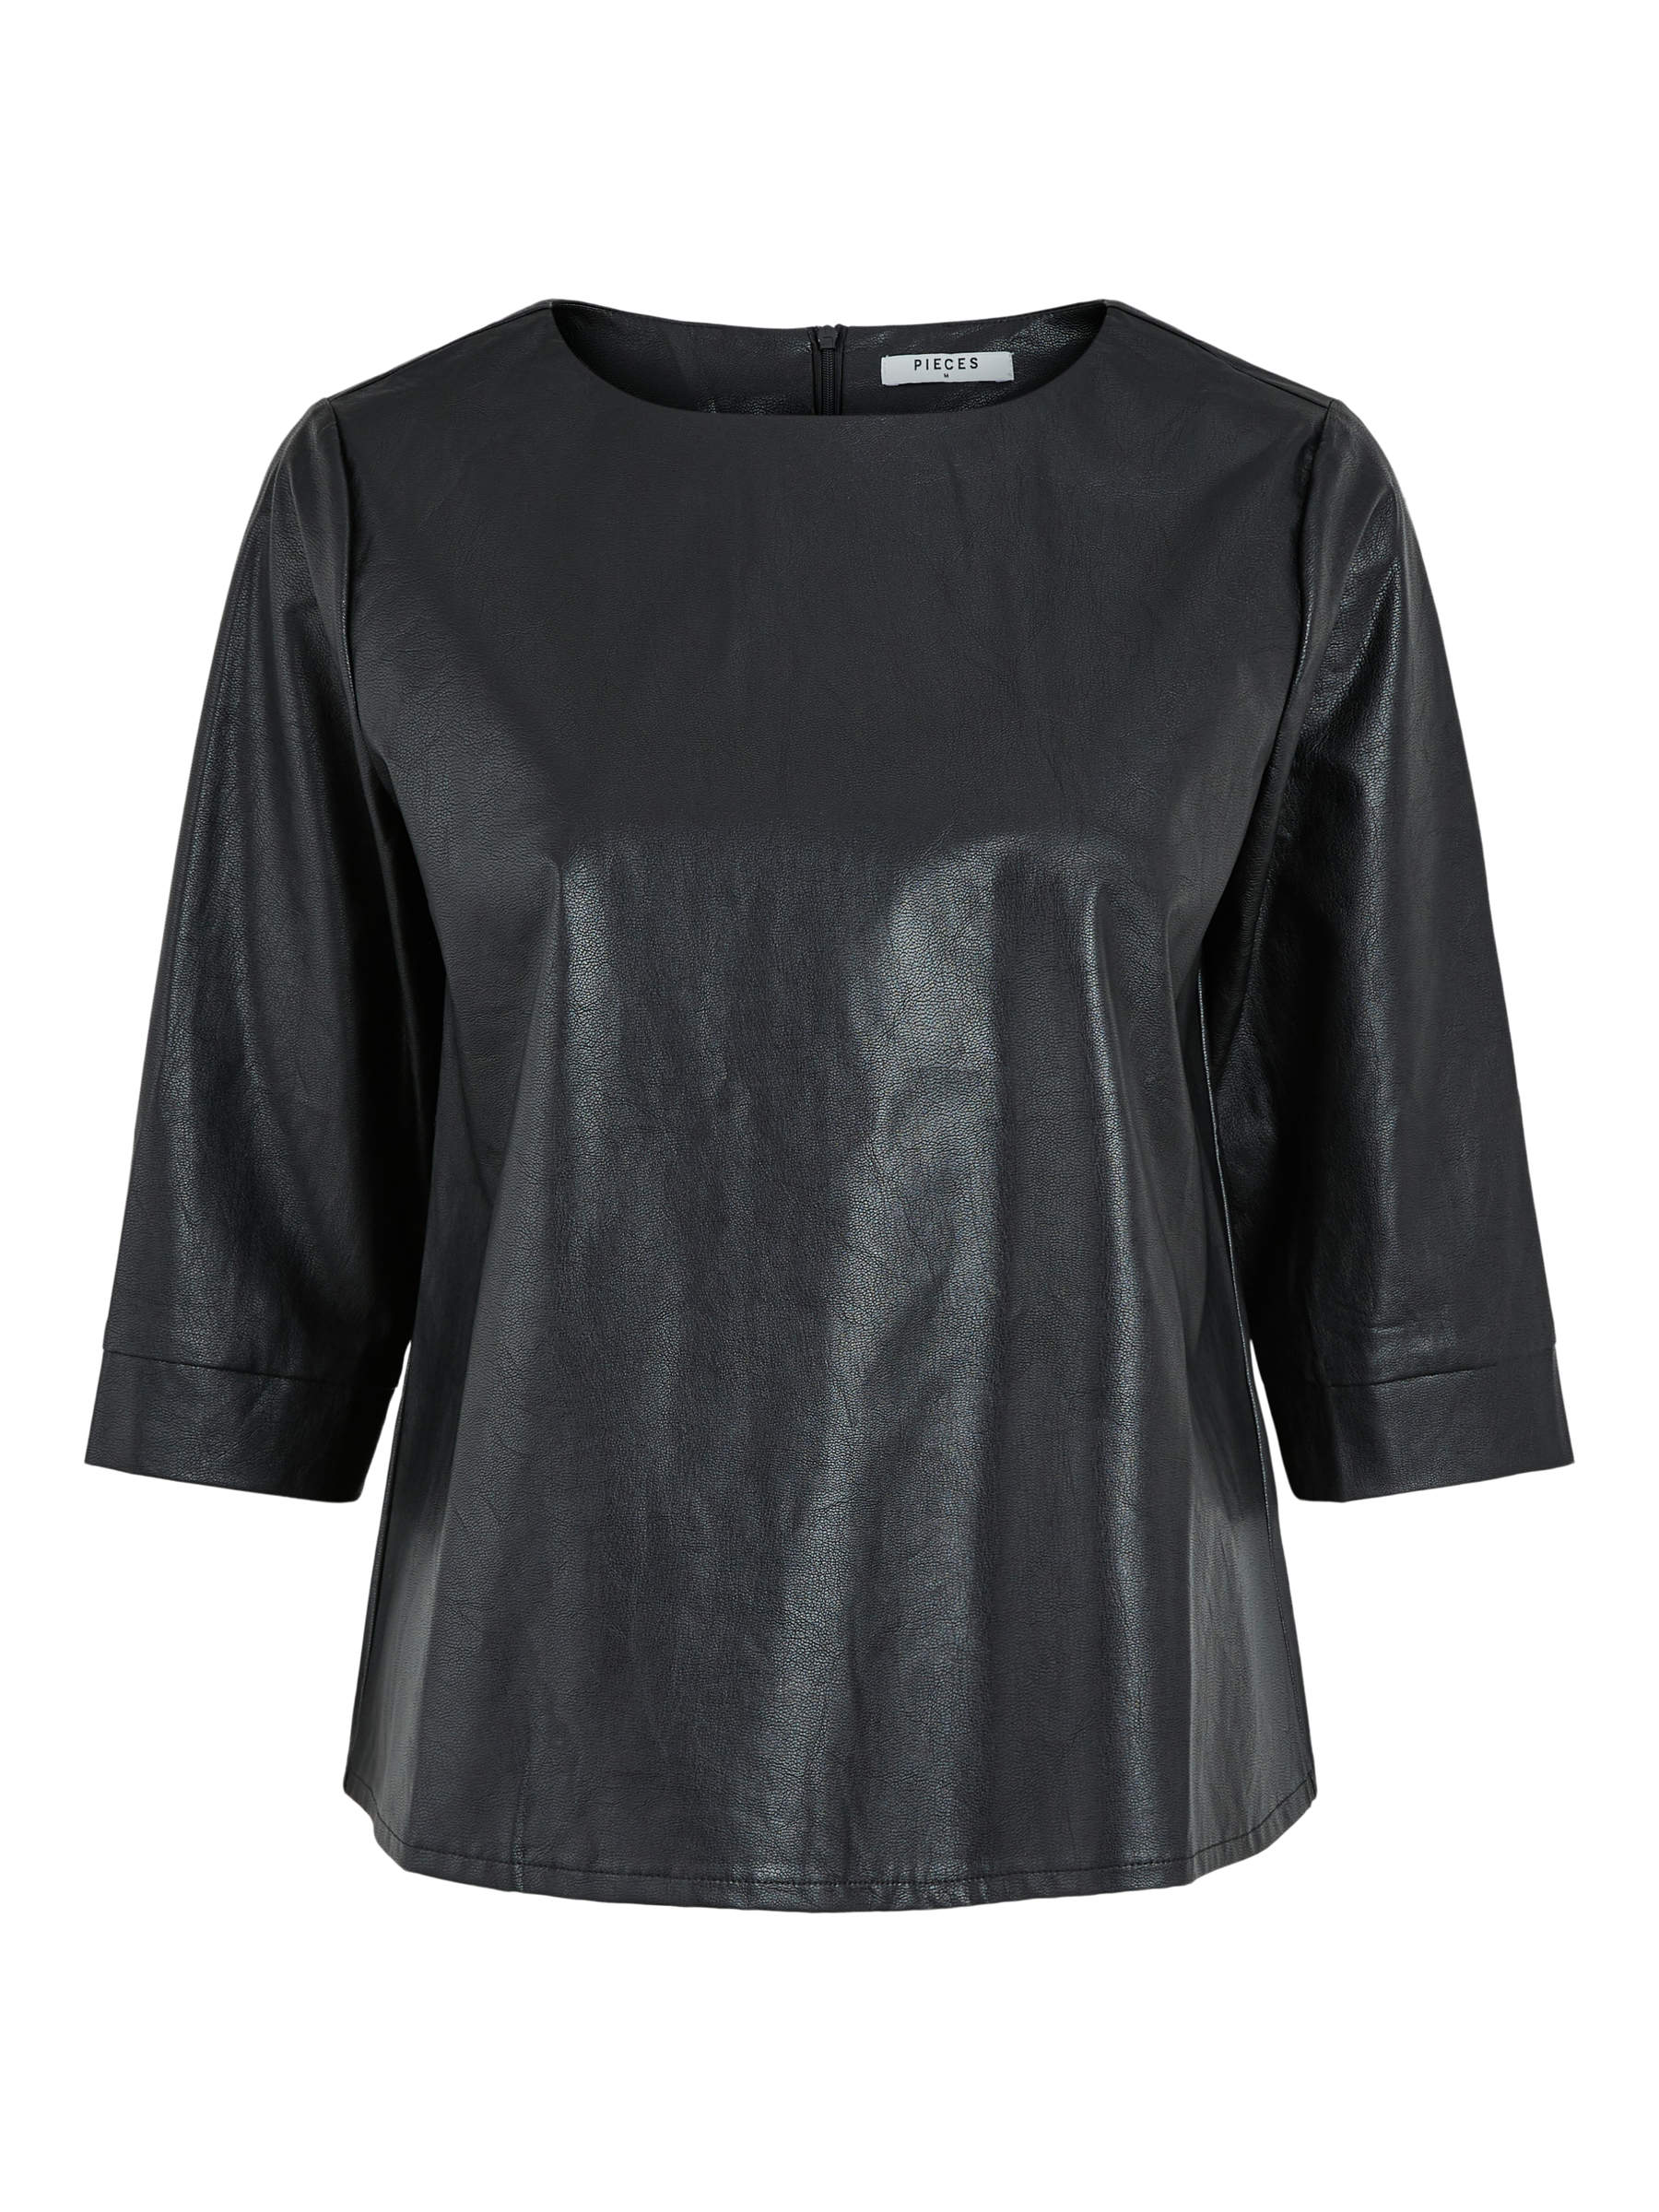 Black LEATHER LOOK BLOUSE | Pieces®